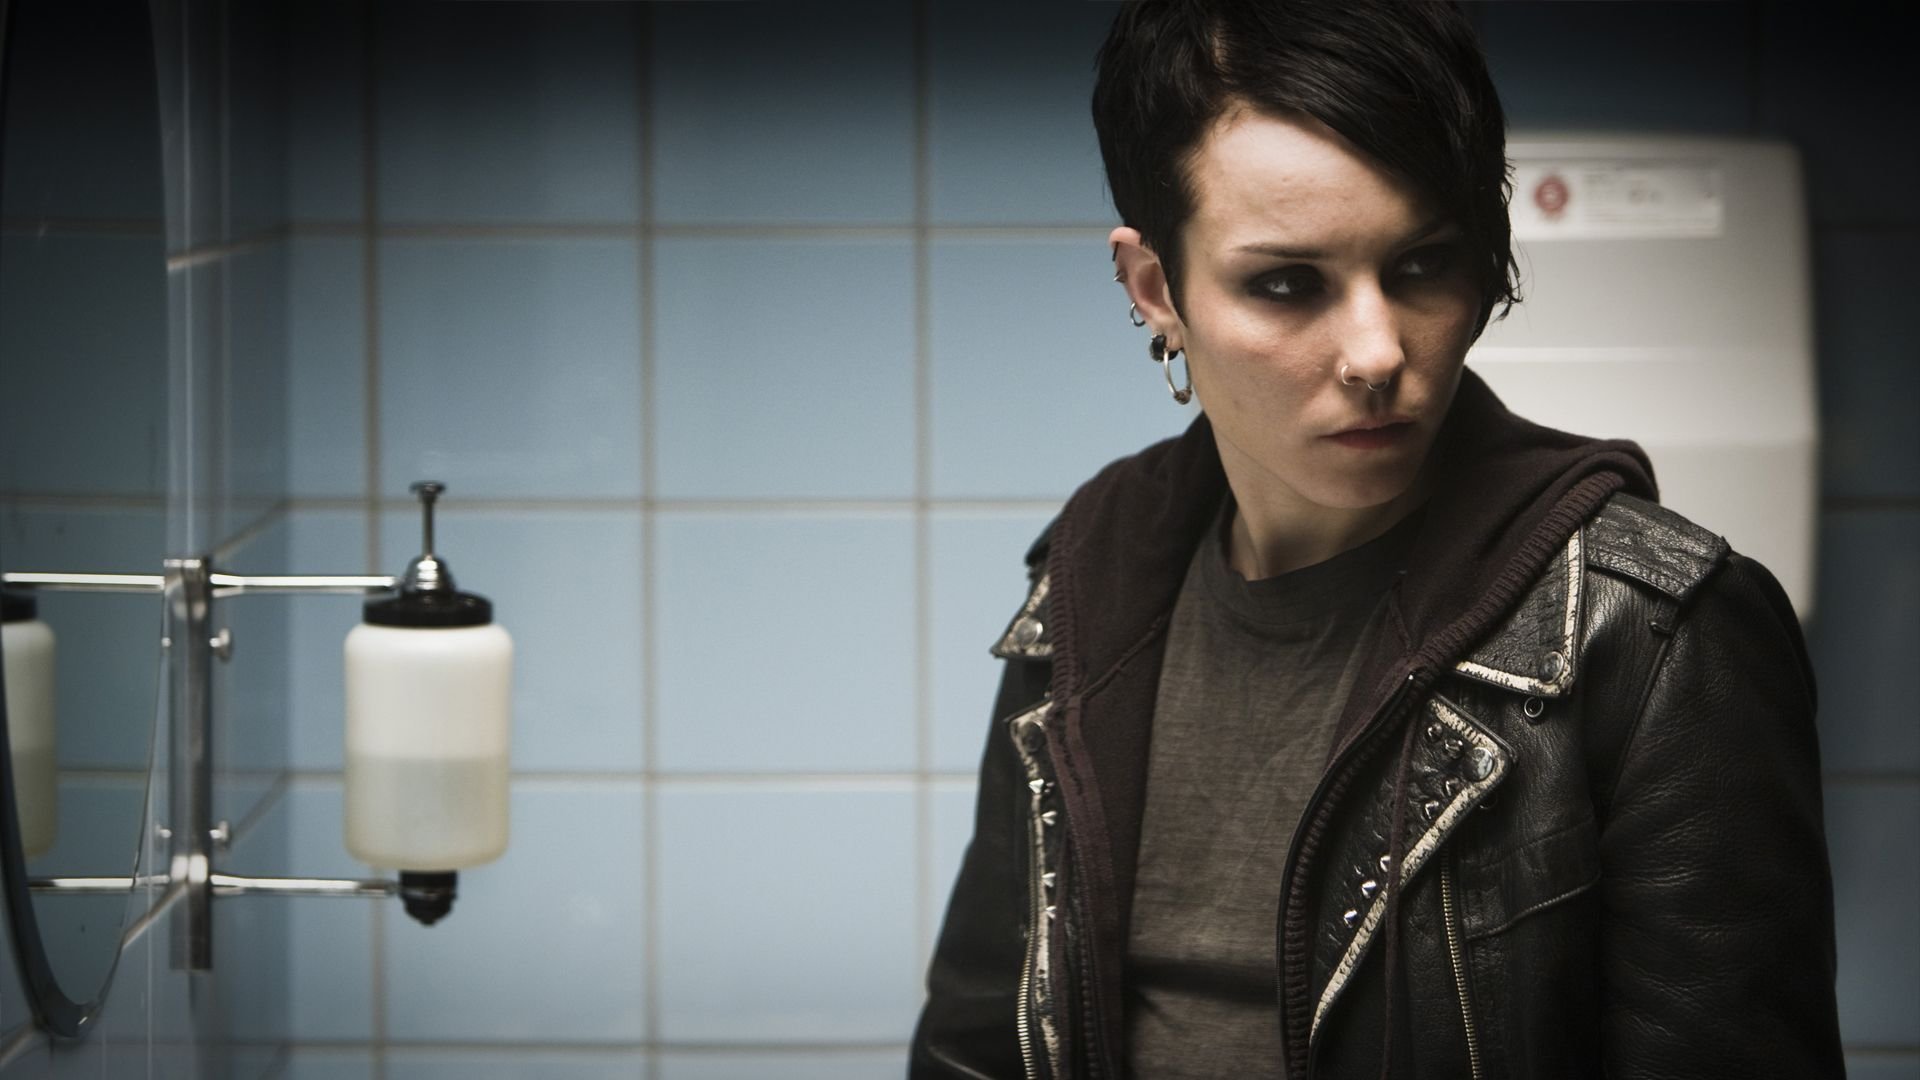 Best The Girl With The Dragon Tattoo wallpaper ID:444147 for High Resolution 1080p computer